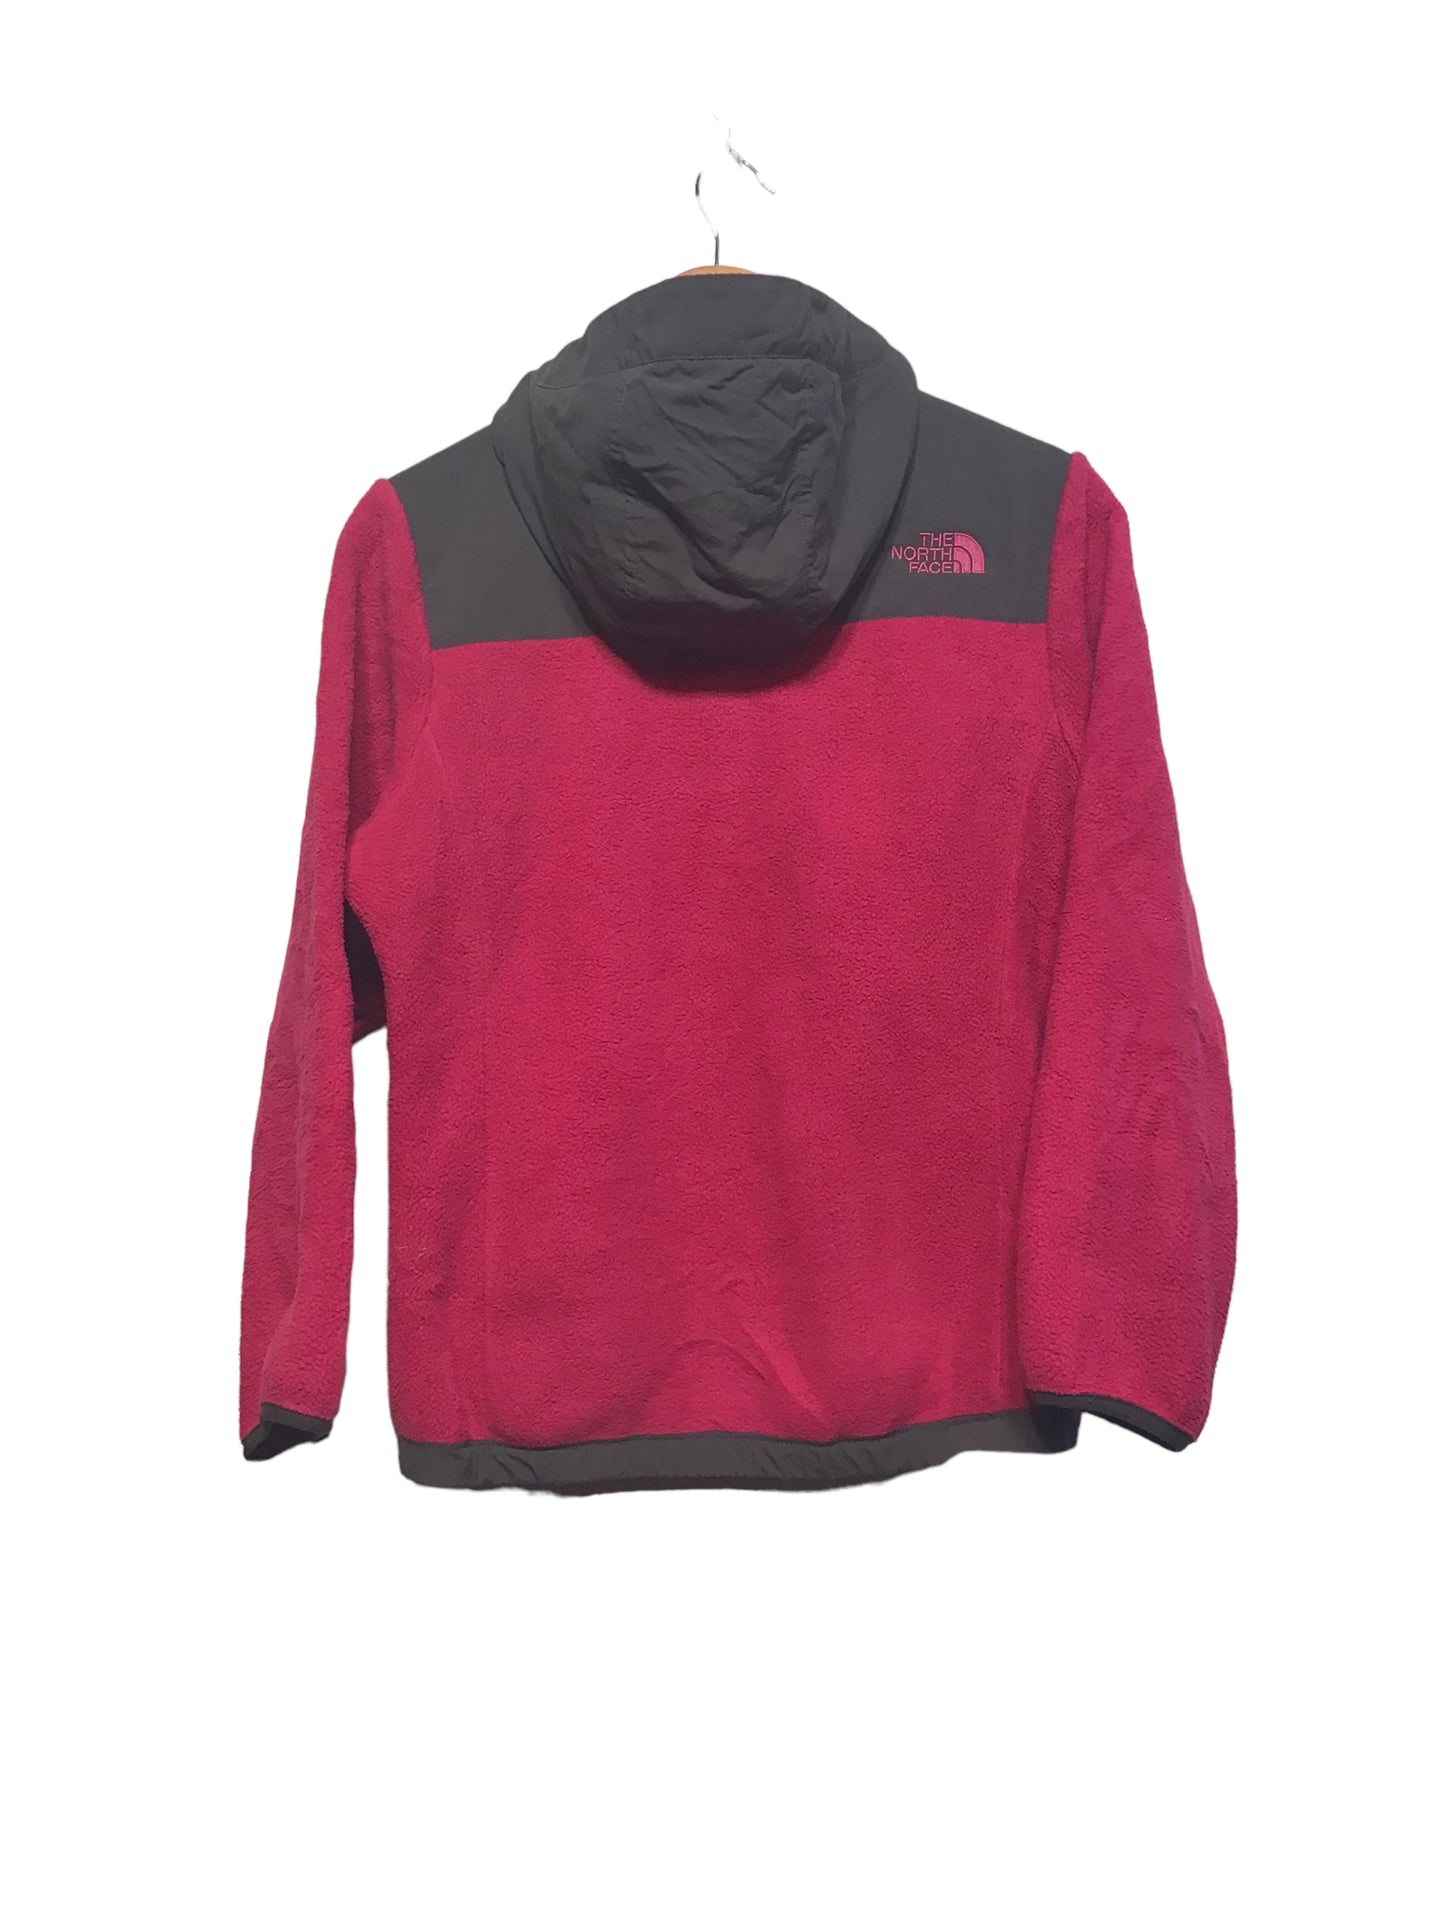 The North Face Pink Denali Jacket (Women’s Size S)